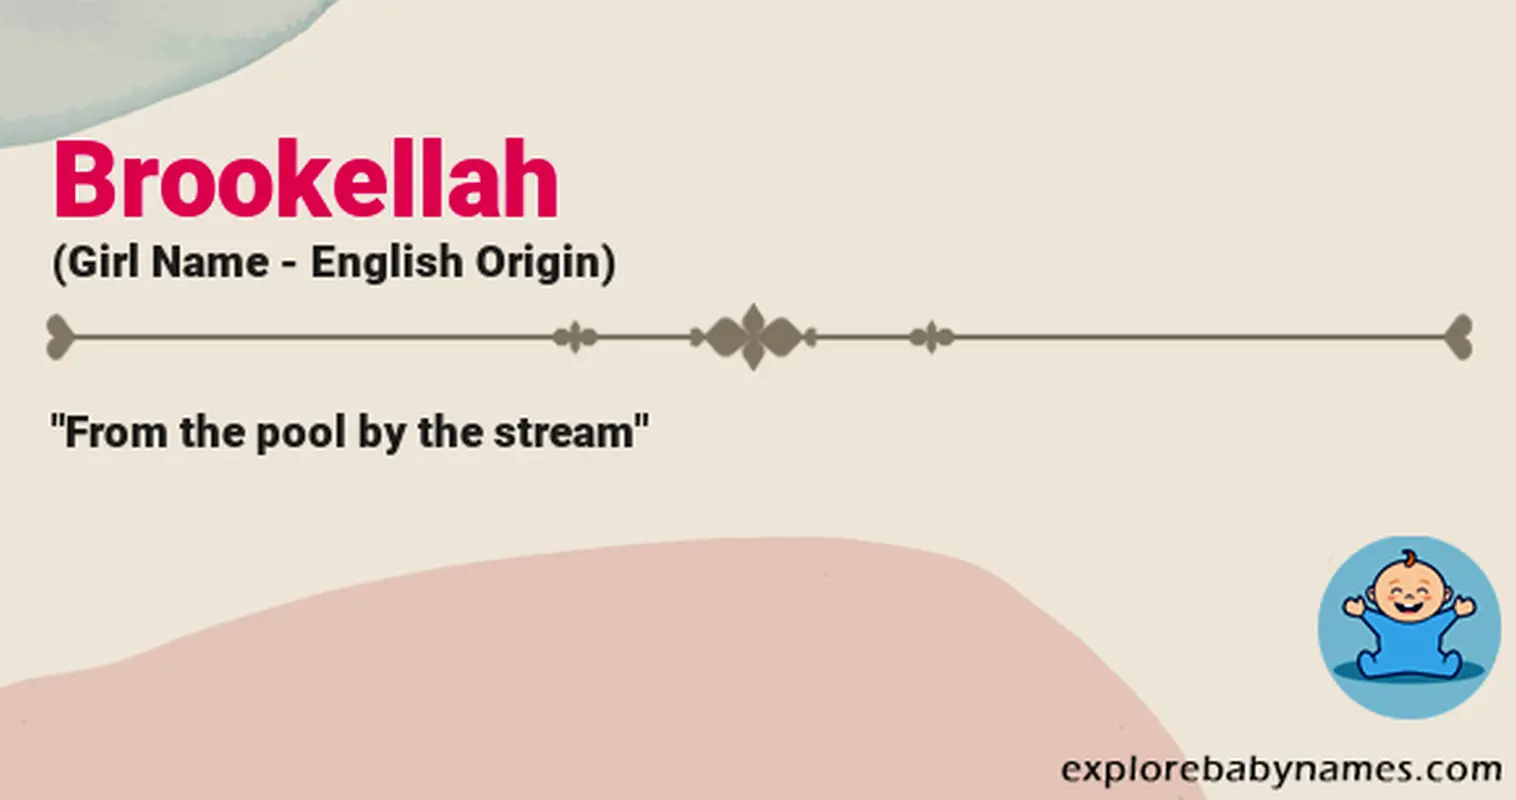 Meaning of Brookellah